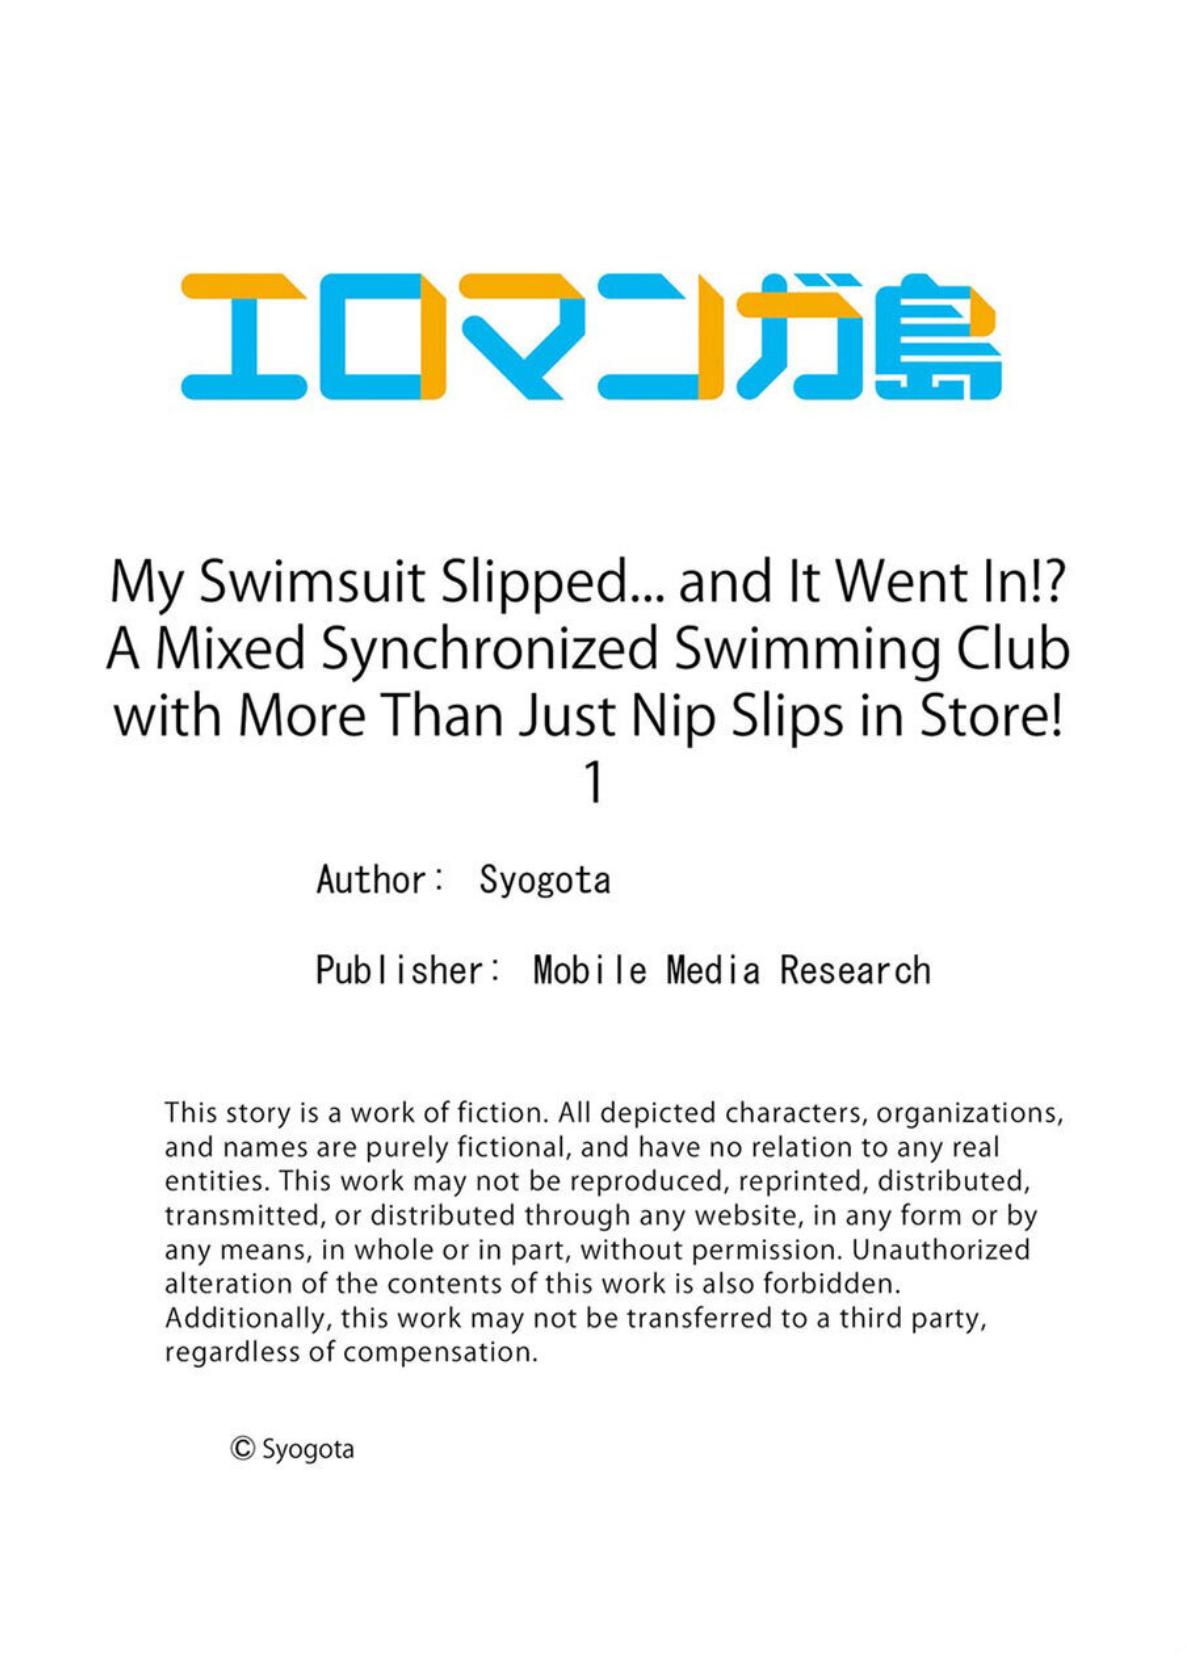 My Swimsuit Slipped... And it went in!? A Mixed Synchronized Swimming Club with More Than Just Nip Slips in Store! ~ 1 26